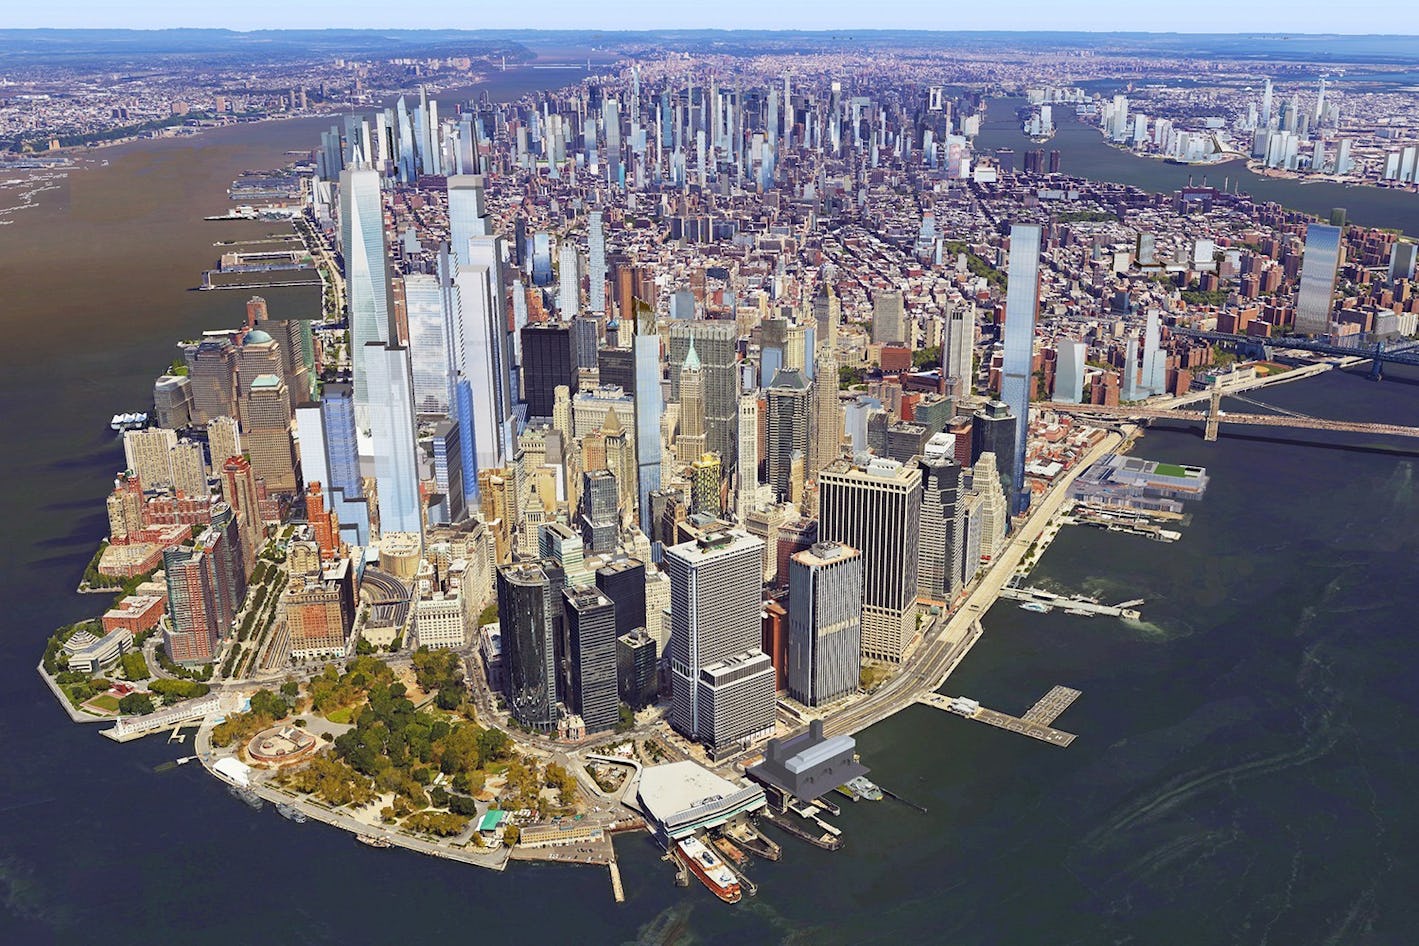 These New Renderings of Manhattan in 2020 Show a SuperTall Future